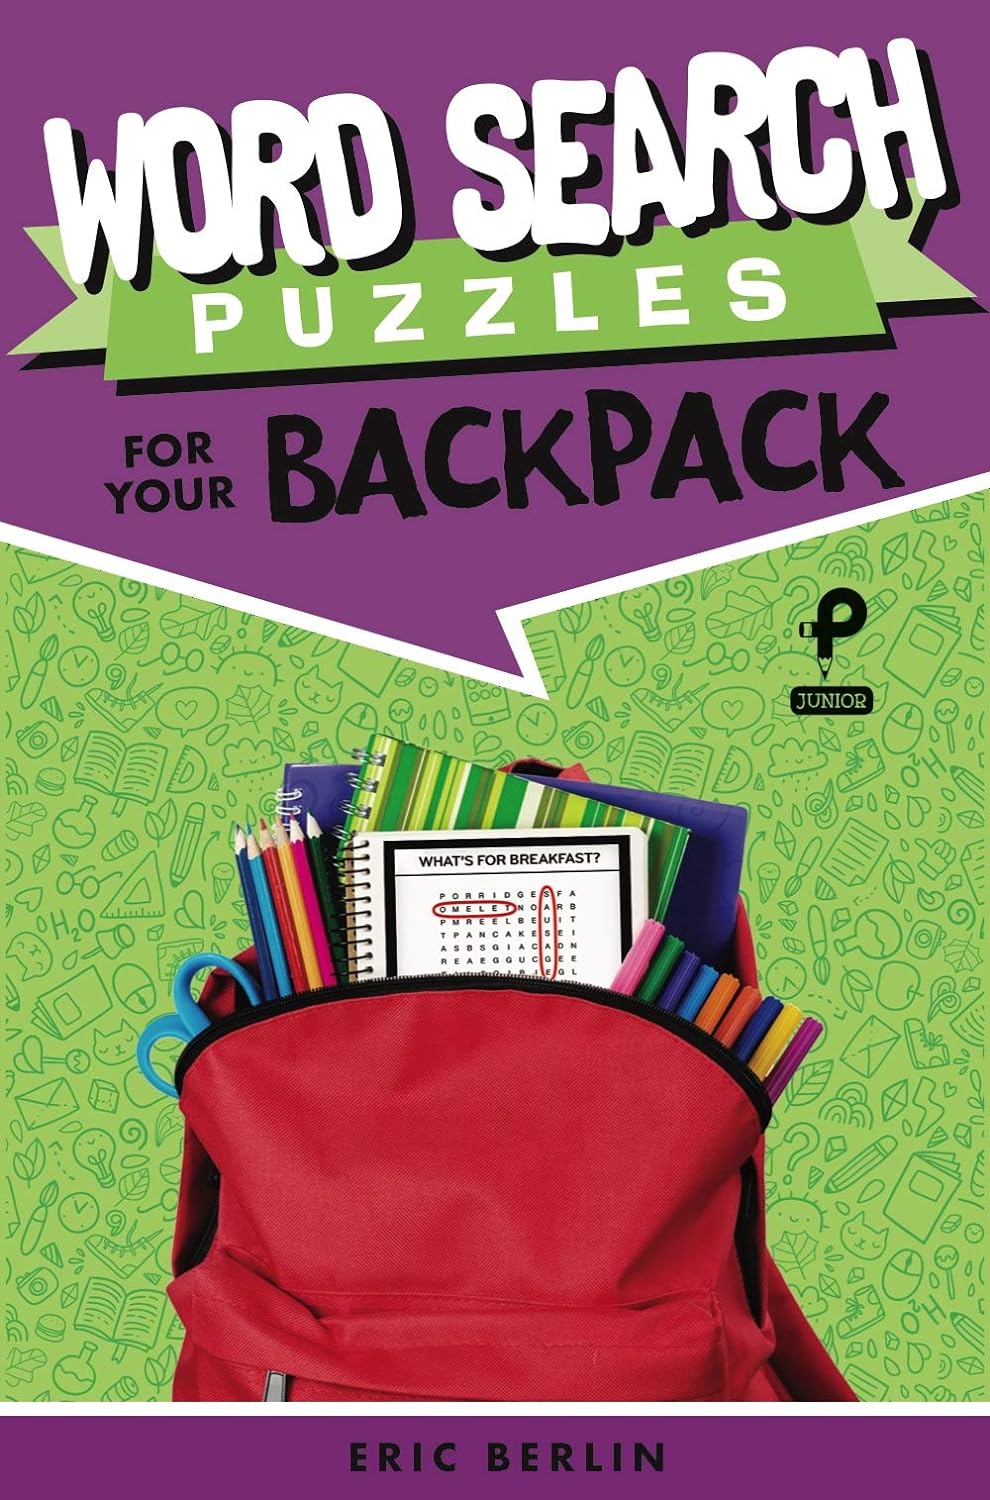 Word Search Puzzles for Your Backpack Cover